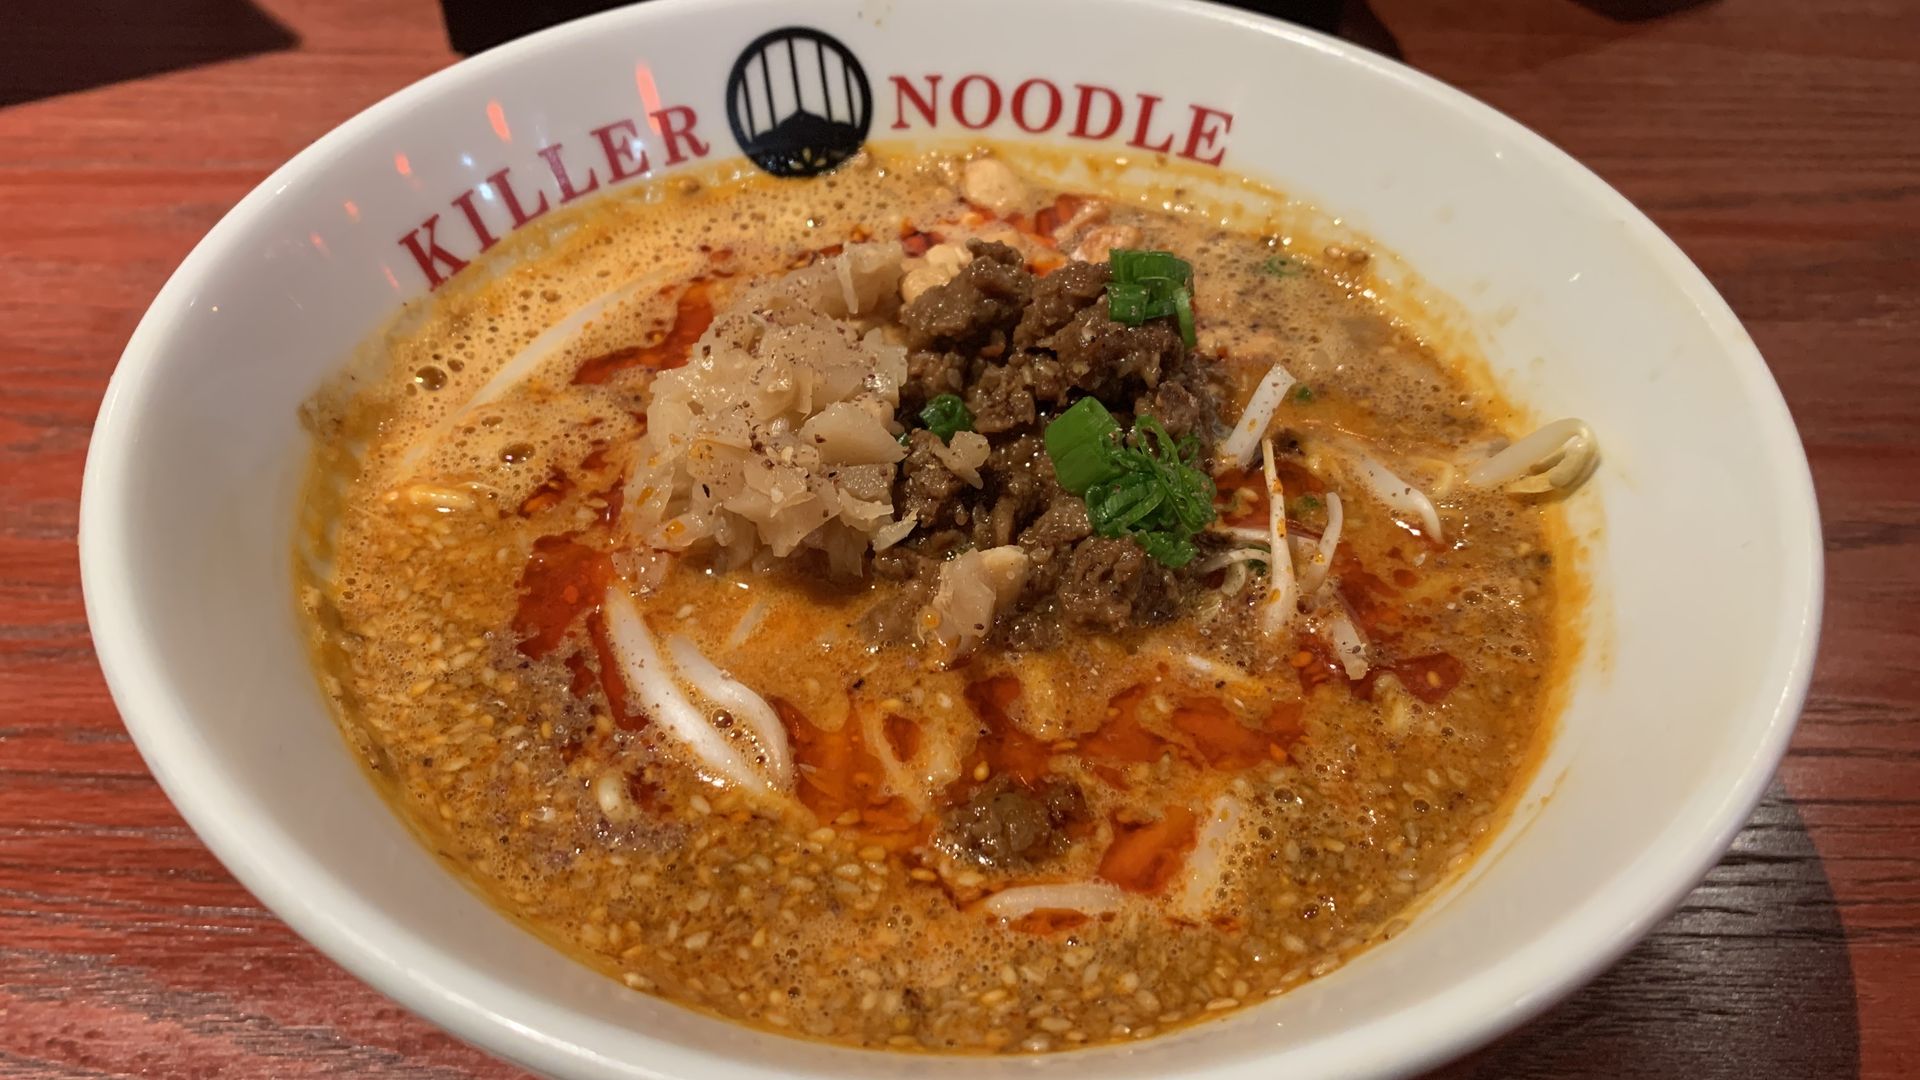 Photo of a bowl with the words "Killer Noodle" and ramen inside the bowl. 